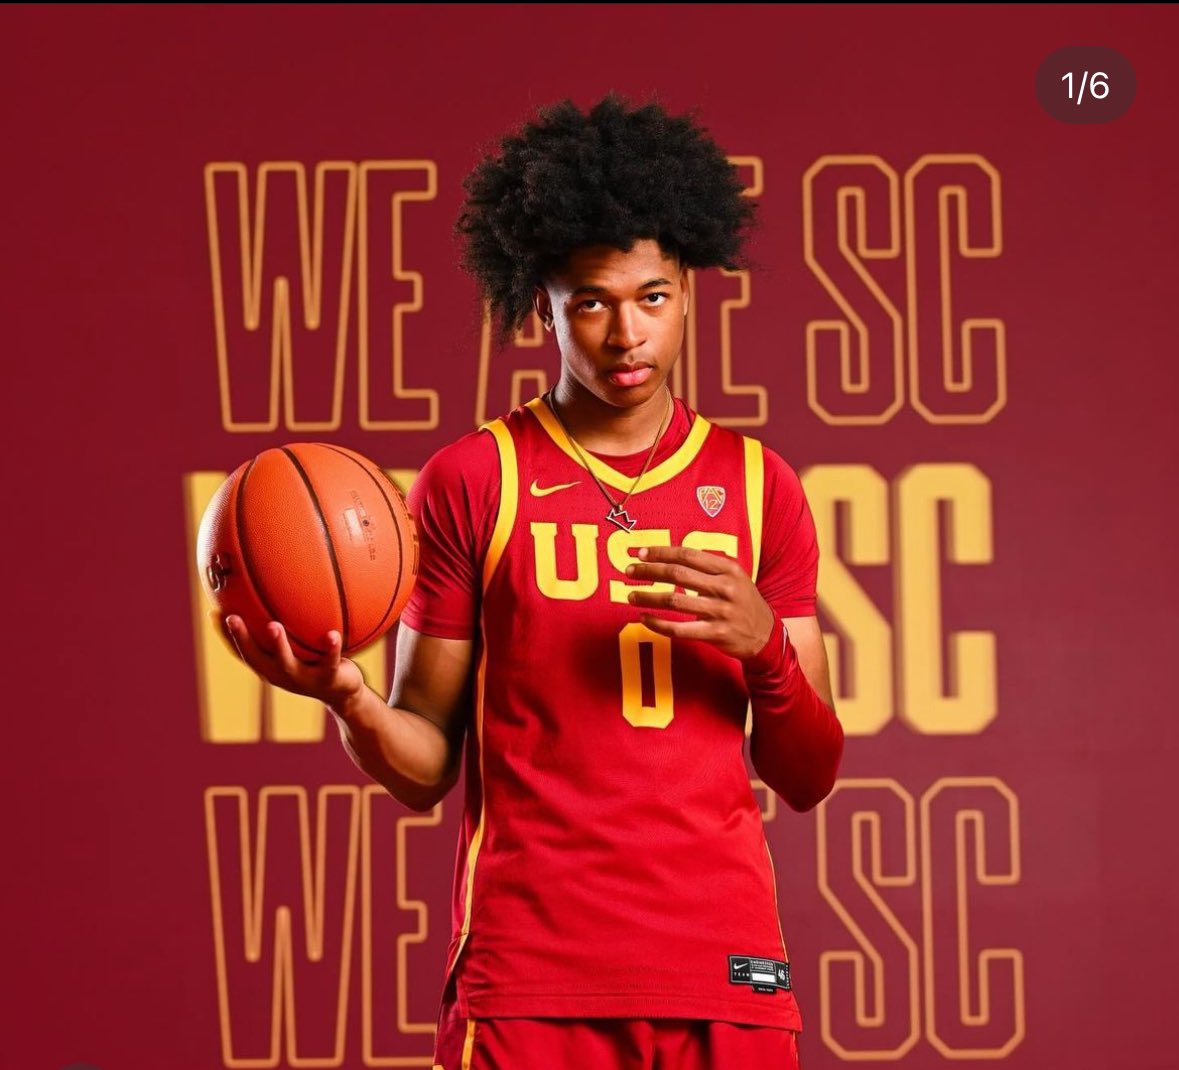 📸San Diego transfer Kevin Patton Jr. on his visit to USC ⤵️ #fighton